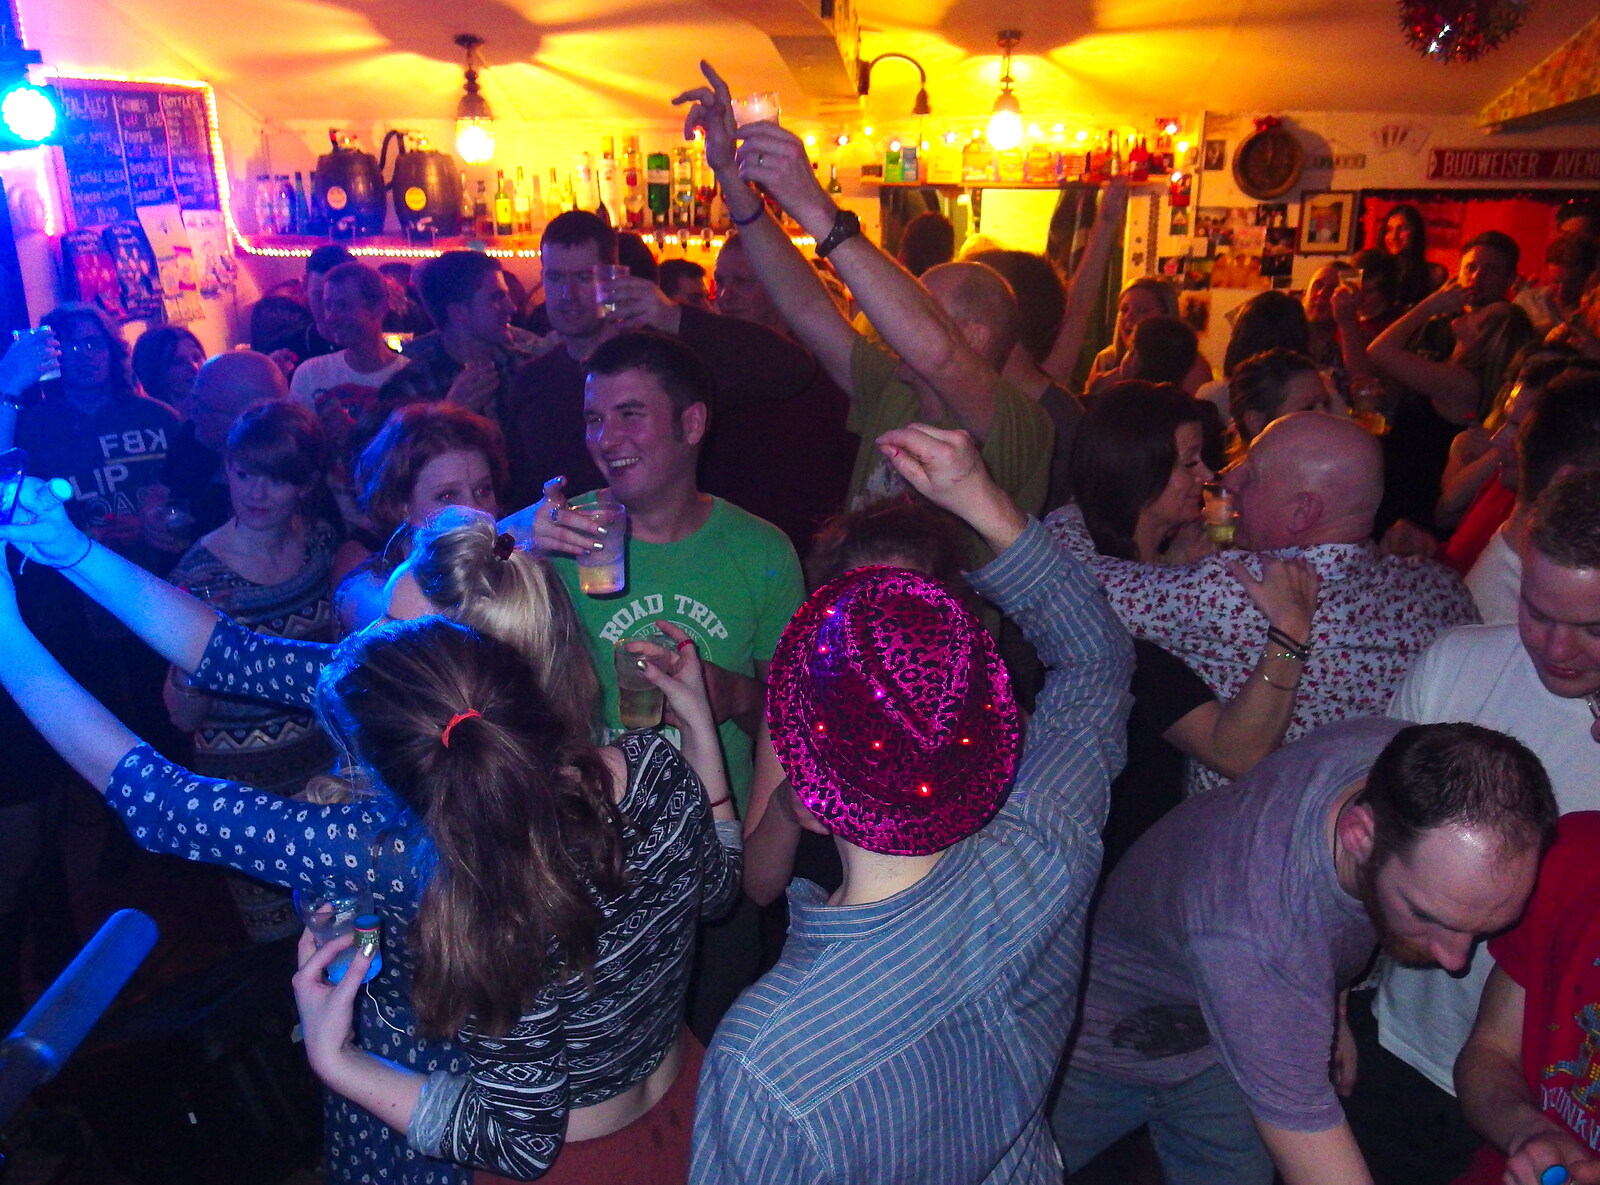 The crowd go nuts at midnight from The BBs Do New Year's Eve at the Barrel, Banham, Norfolk - 31st December 2013